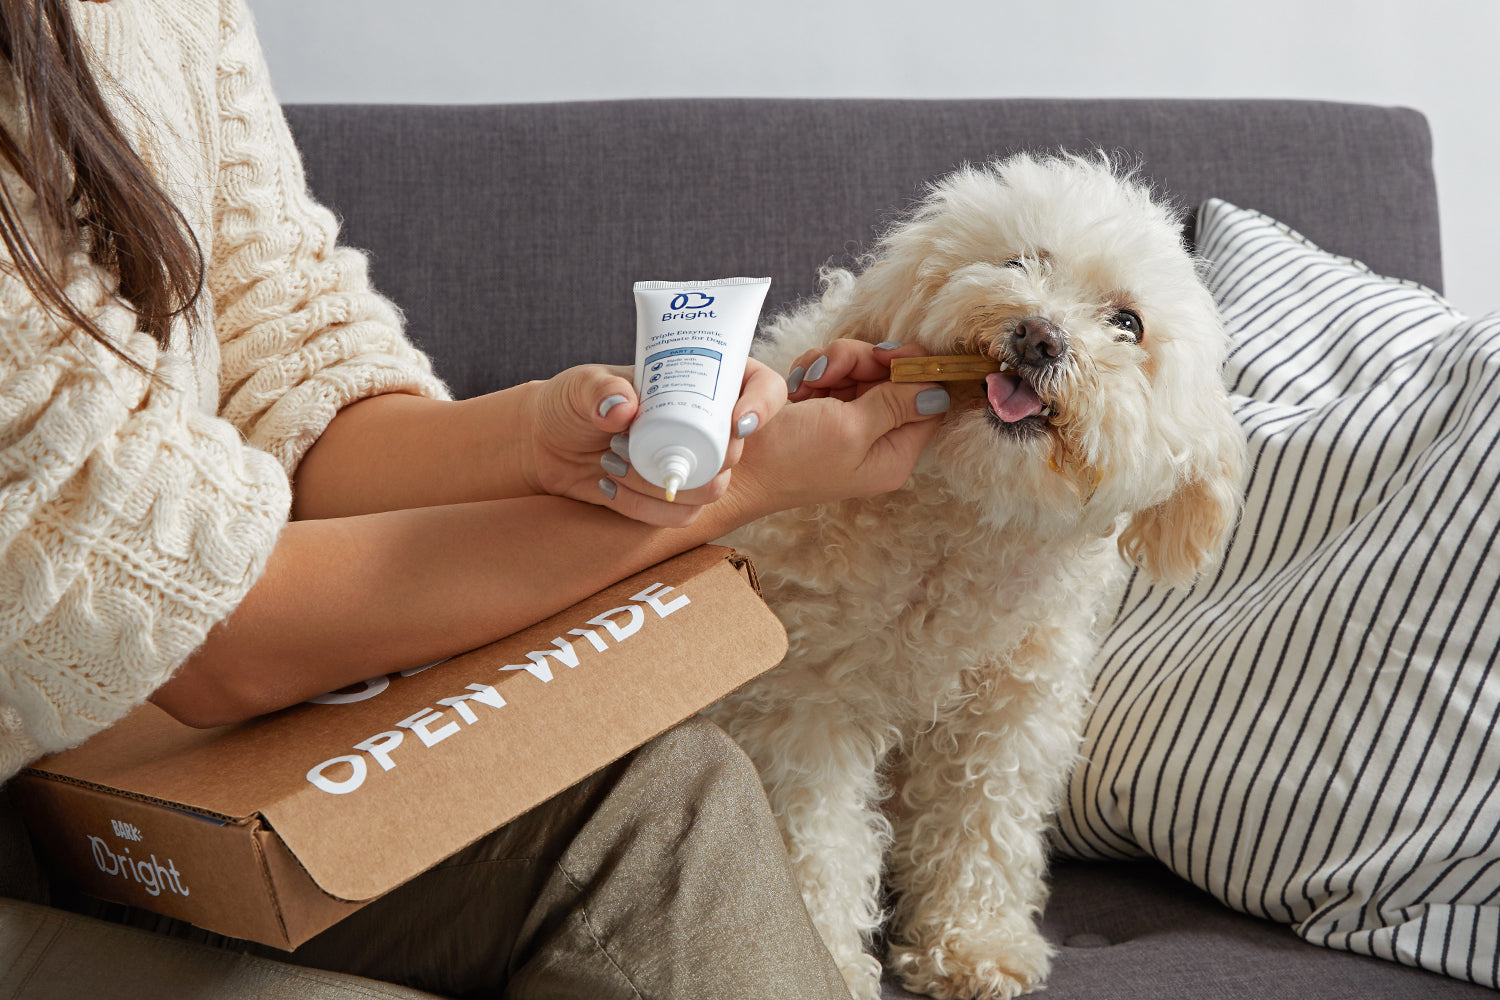 Introducing Bright Dental: Brush Your Dogs' Teeth Without Actually Brushing Their Teeth